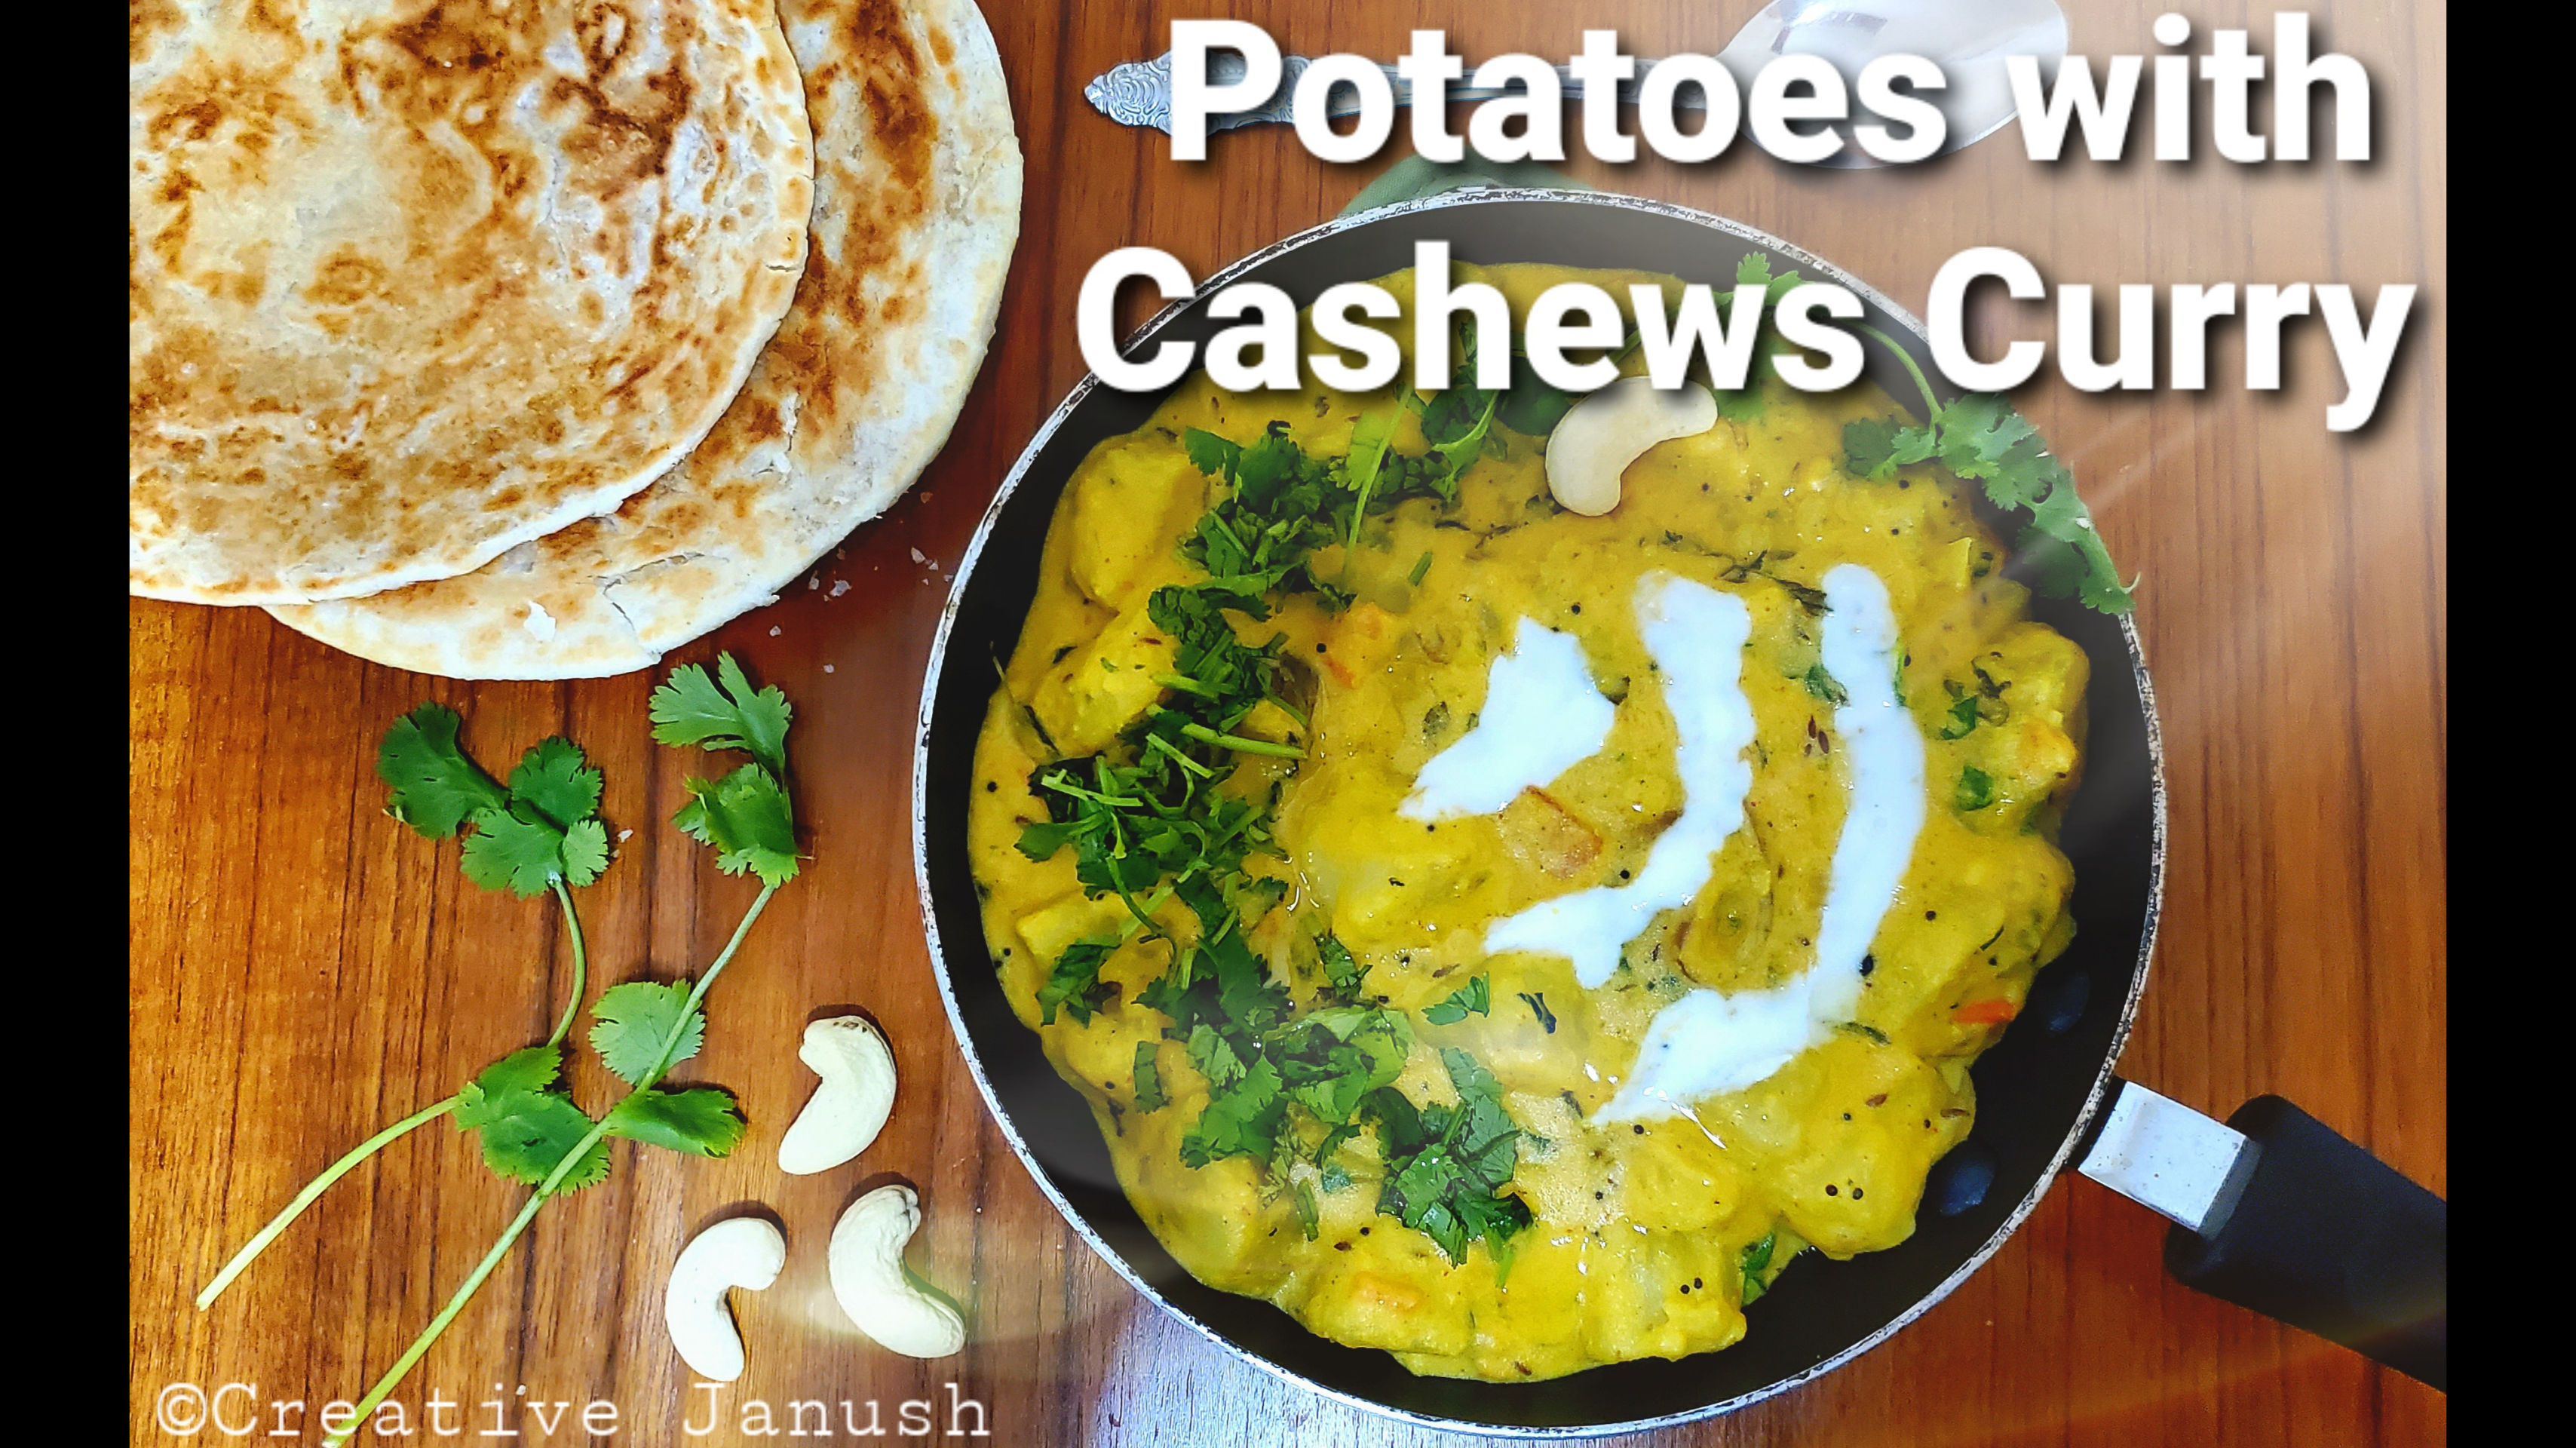 Potatoes with Cashew Curry